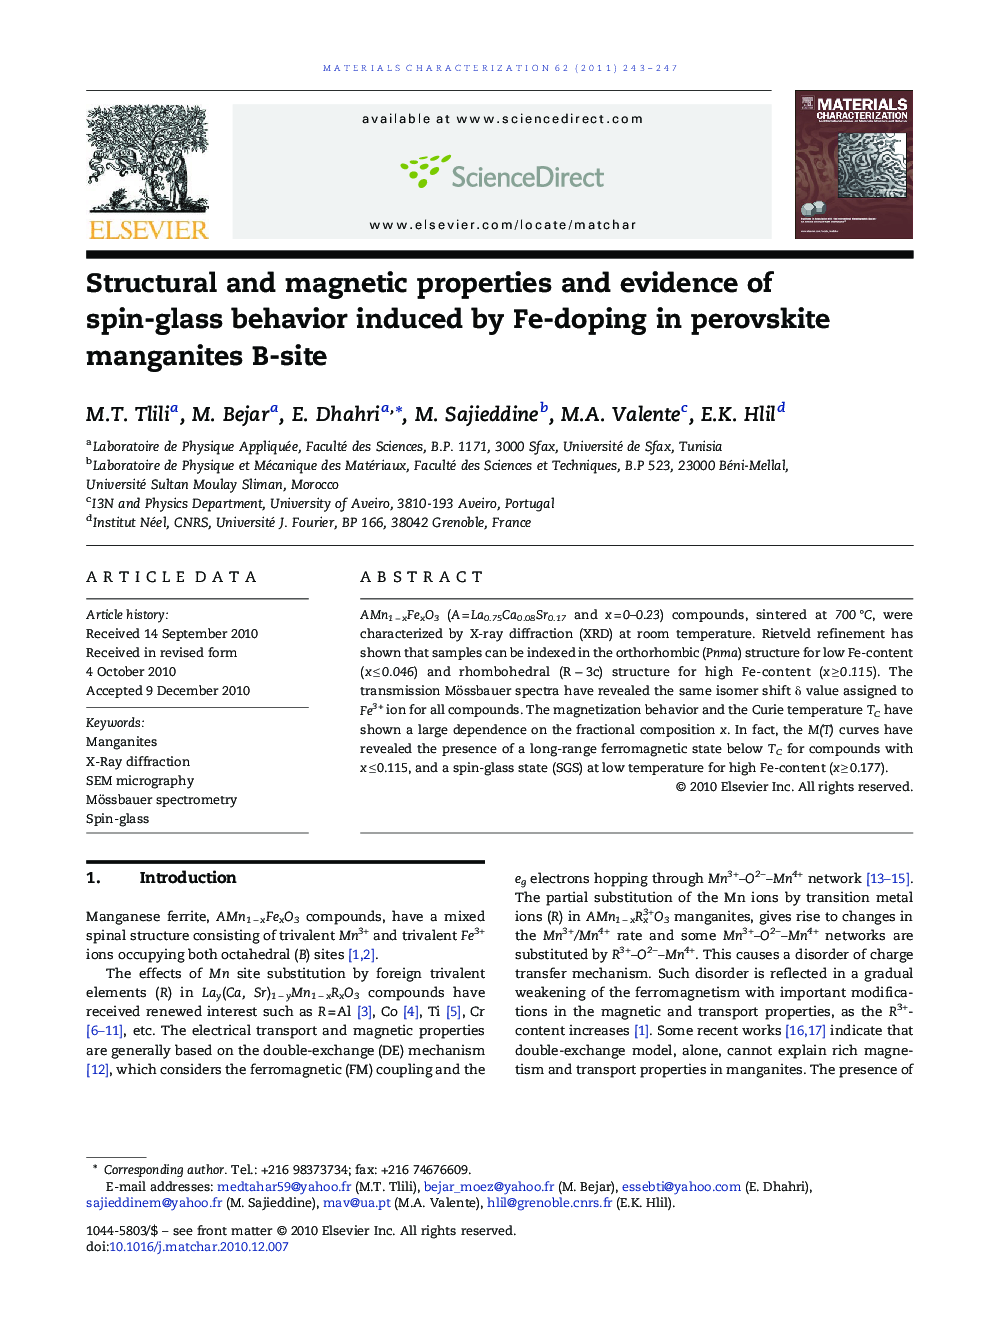 Structural and magnetic properties and evidence of spin-glass behavior induced by Fe-doping in perovskite manganites B-site